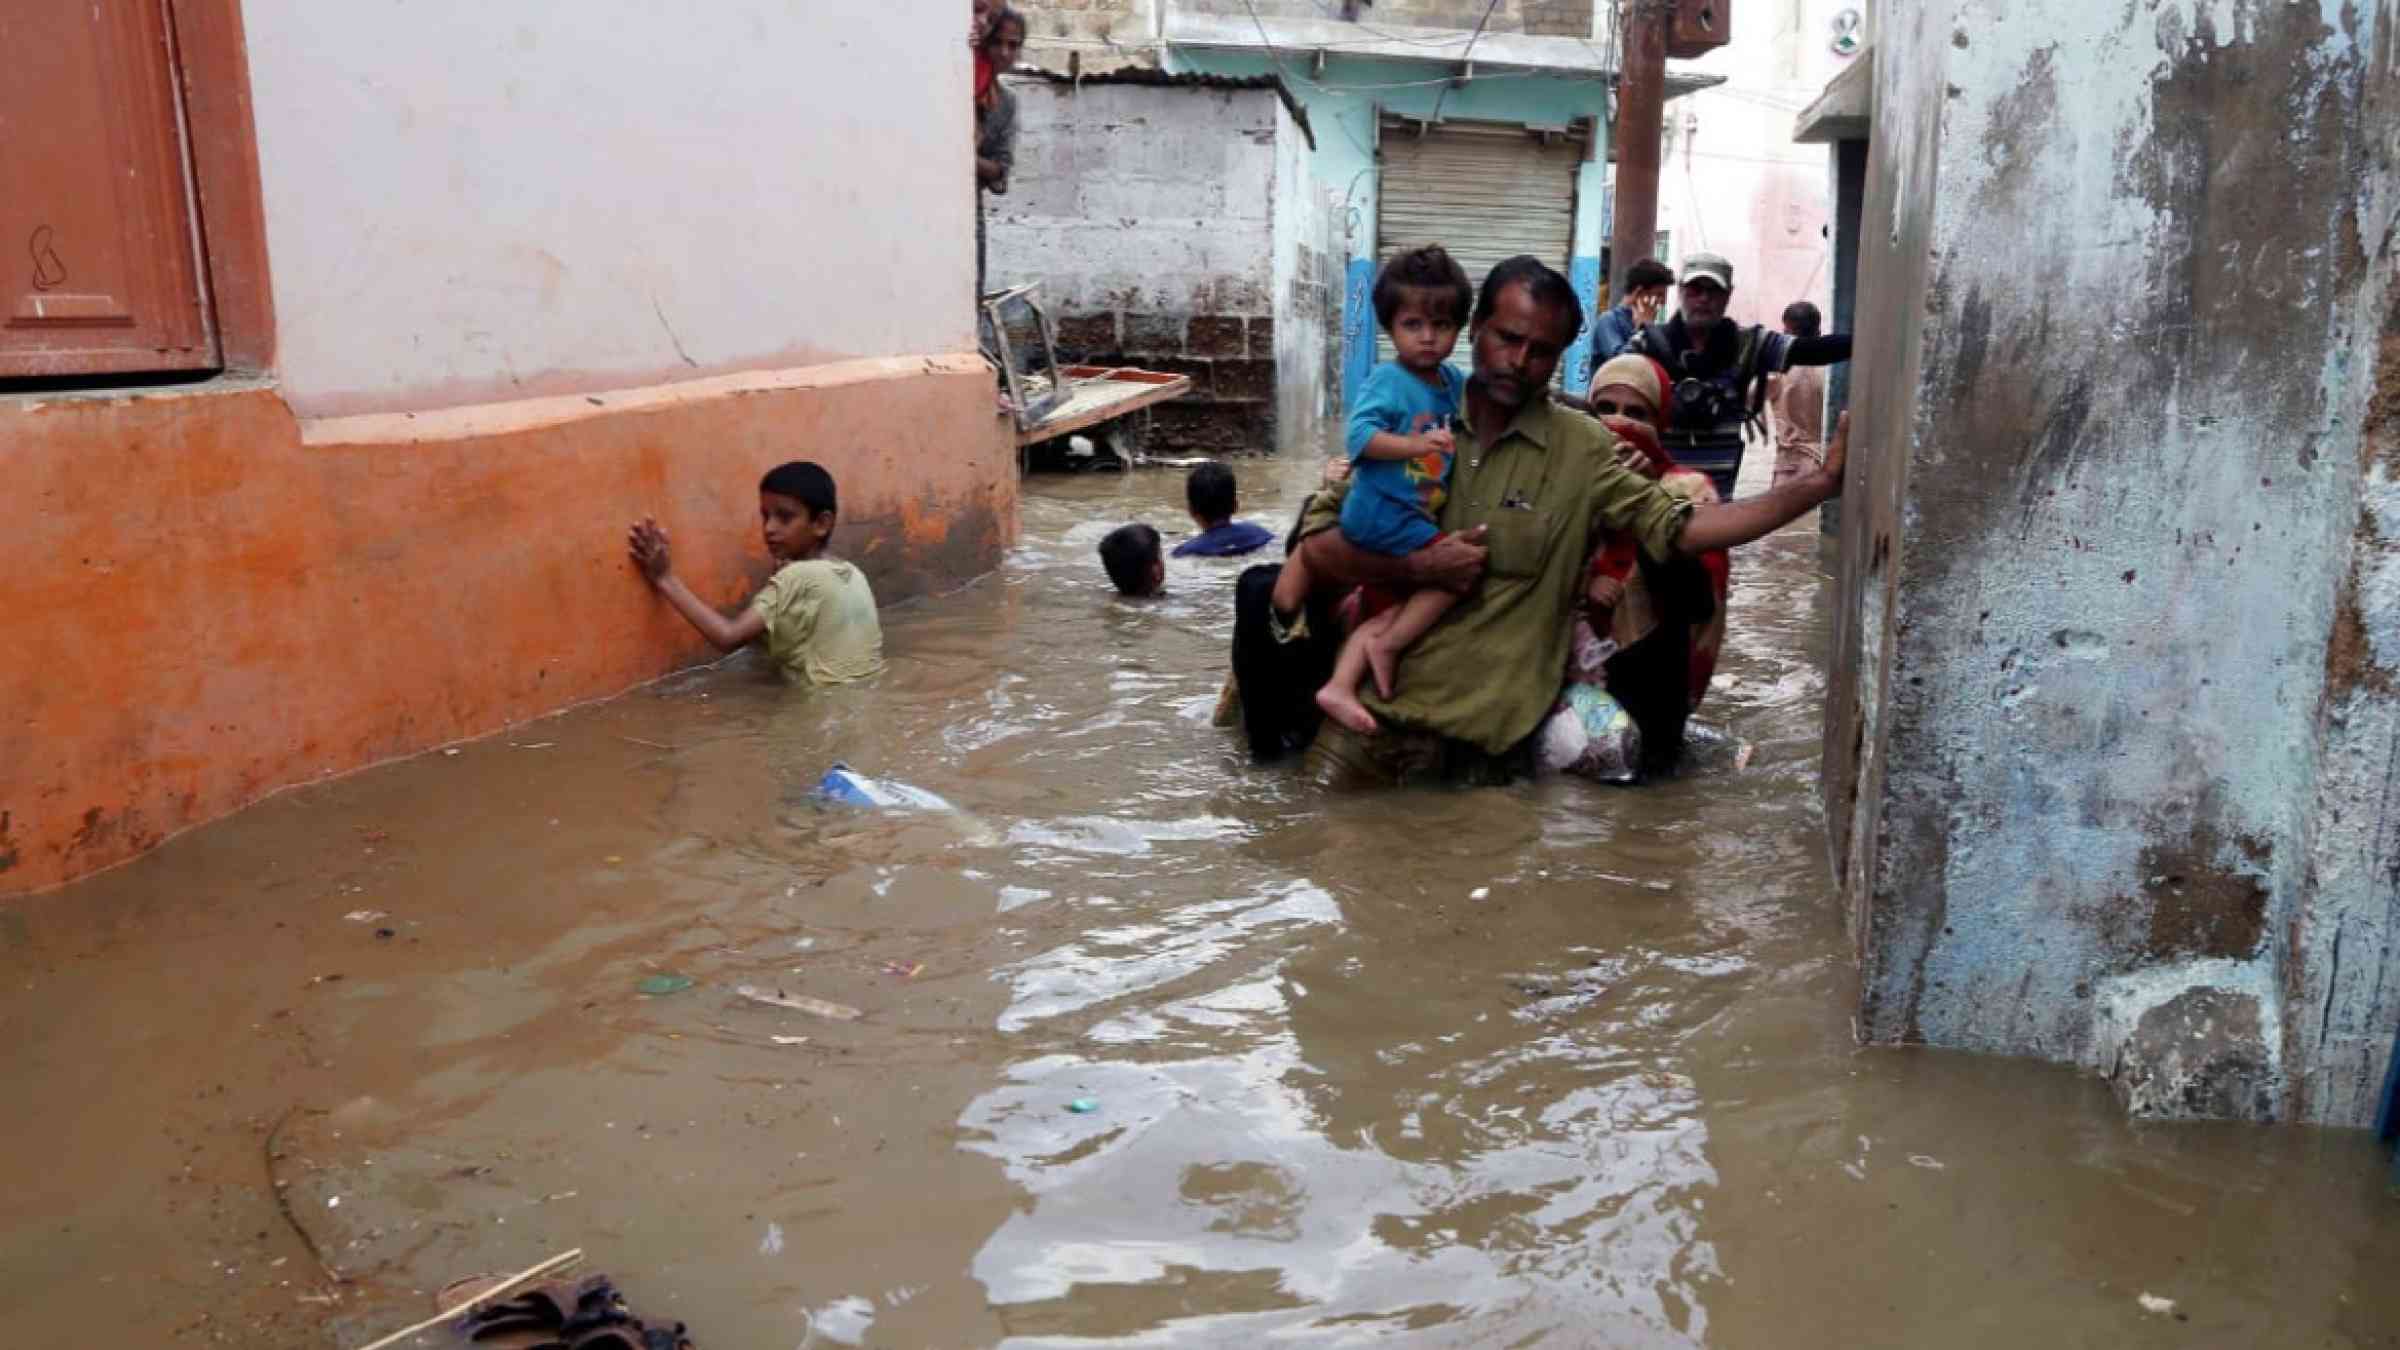 Adults and children walking through flooded streets in Pakistan